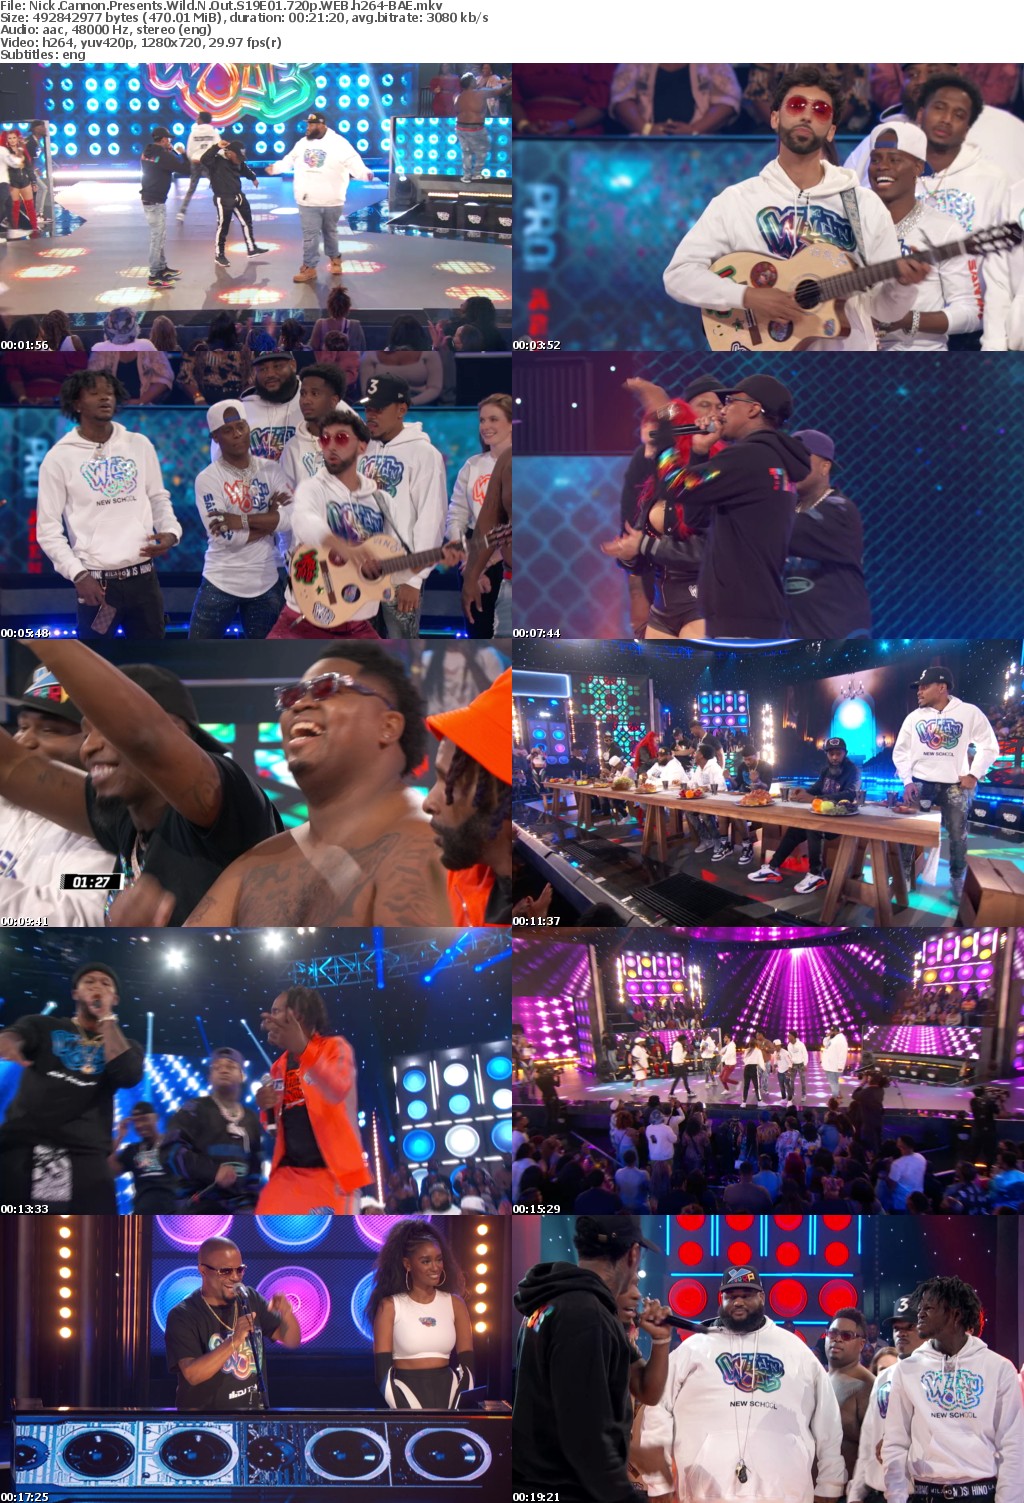 Nick Cannon Presents Wild N Out S19E01 720p WEB h264-BAE